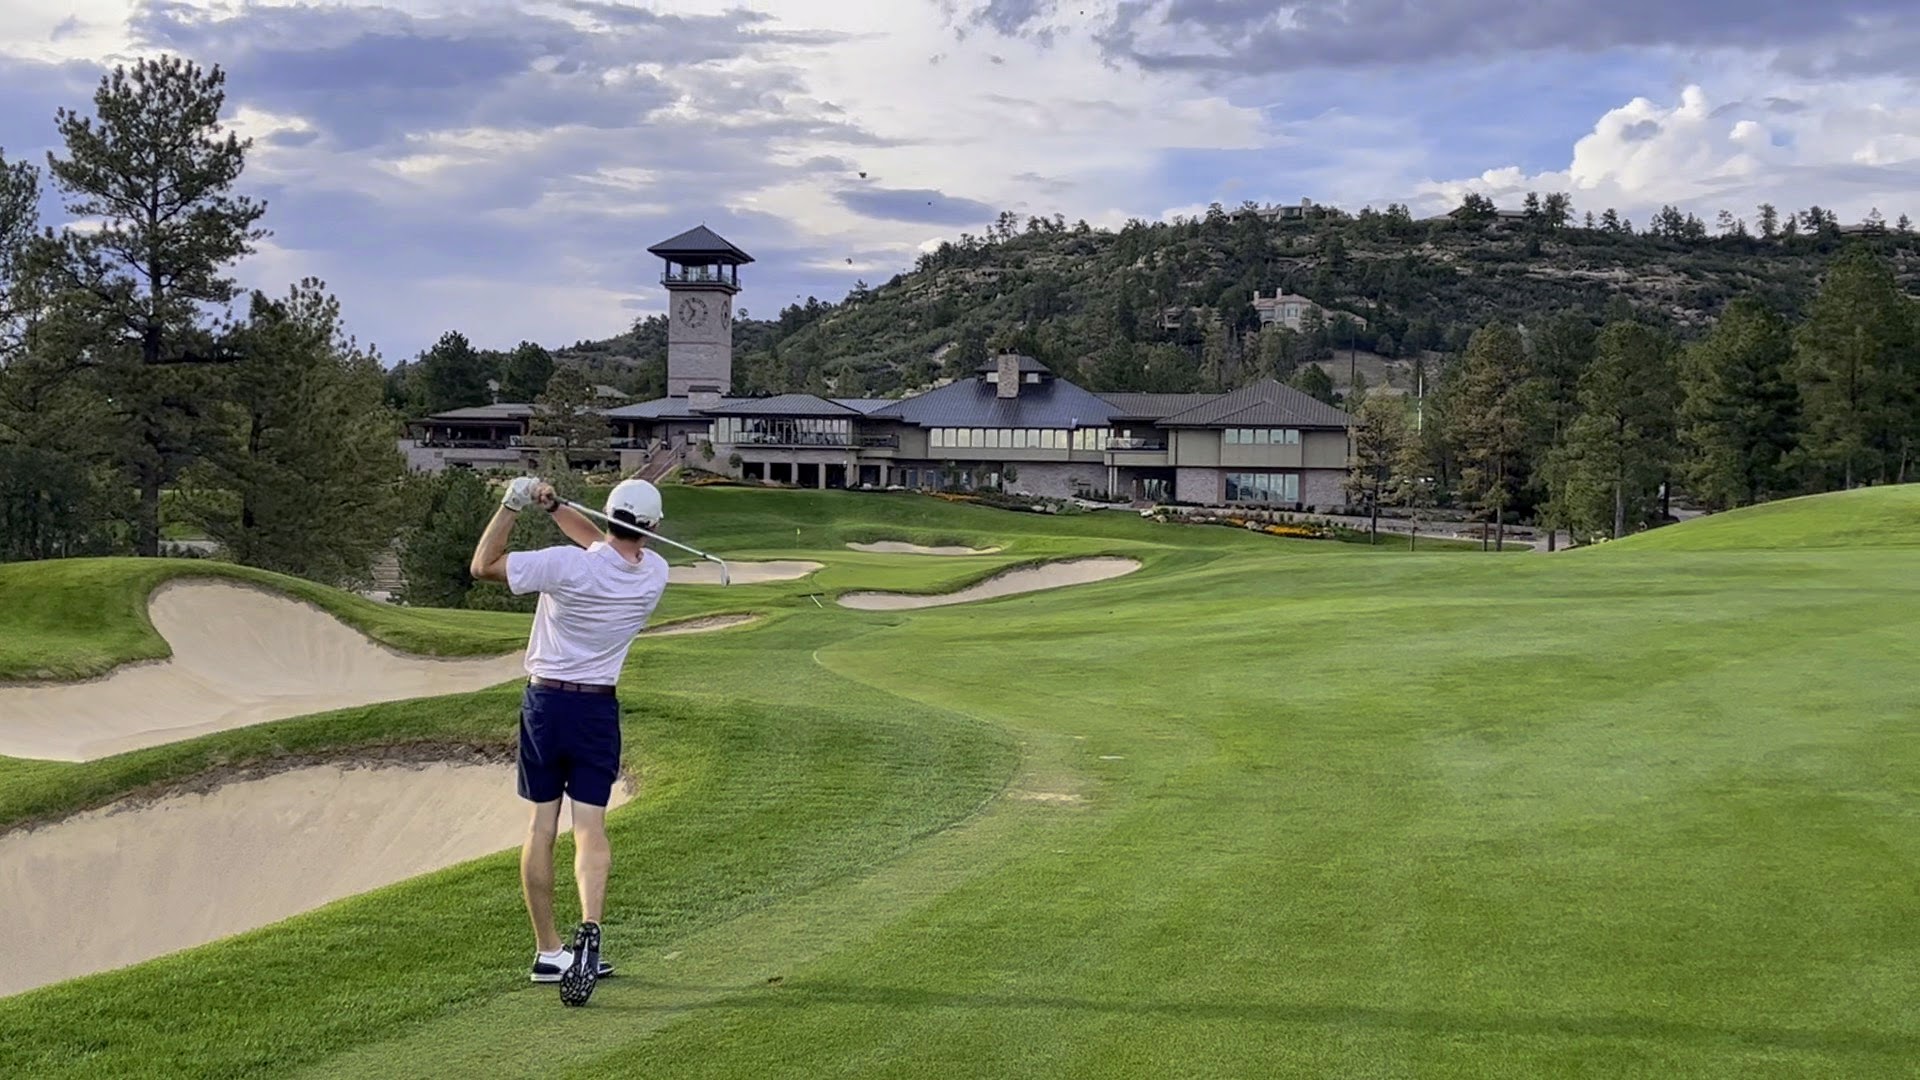 “I played some of the best golf in my life this summer,” 168ƽ̨_ʱȷ-ע|iss said. “Thanks to my boss, me and my dad got to play at Castle Pines Golf Club, one of the more exclusive courses in the state that will host the BMW Championship in 2024. It was awesome!”